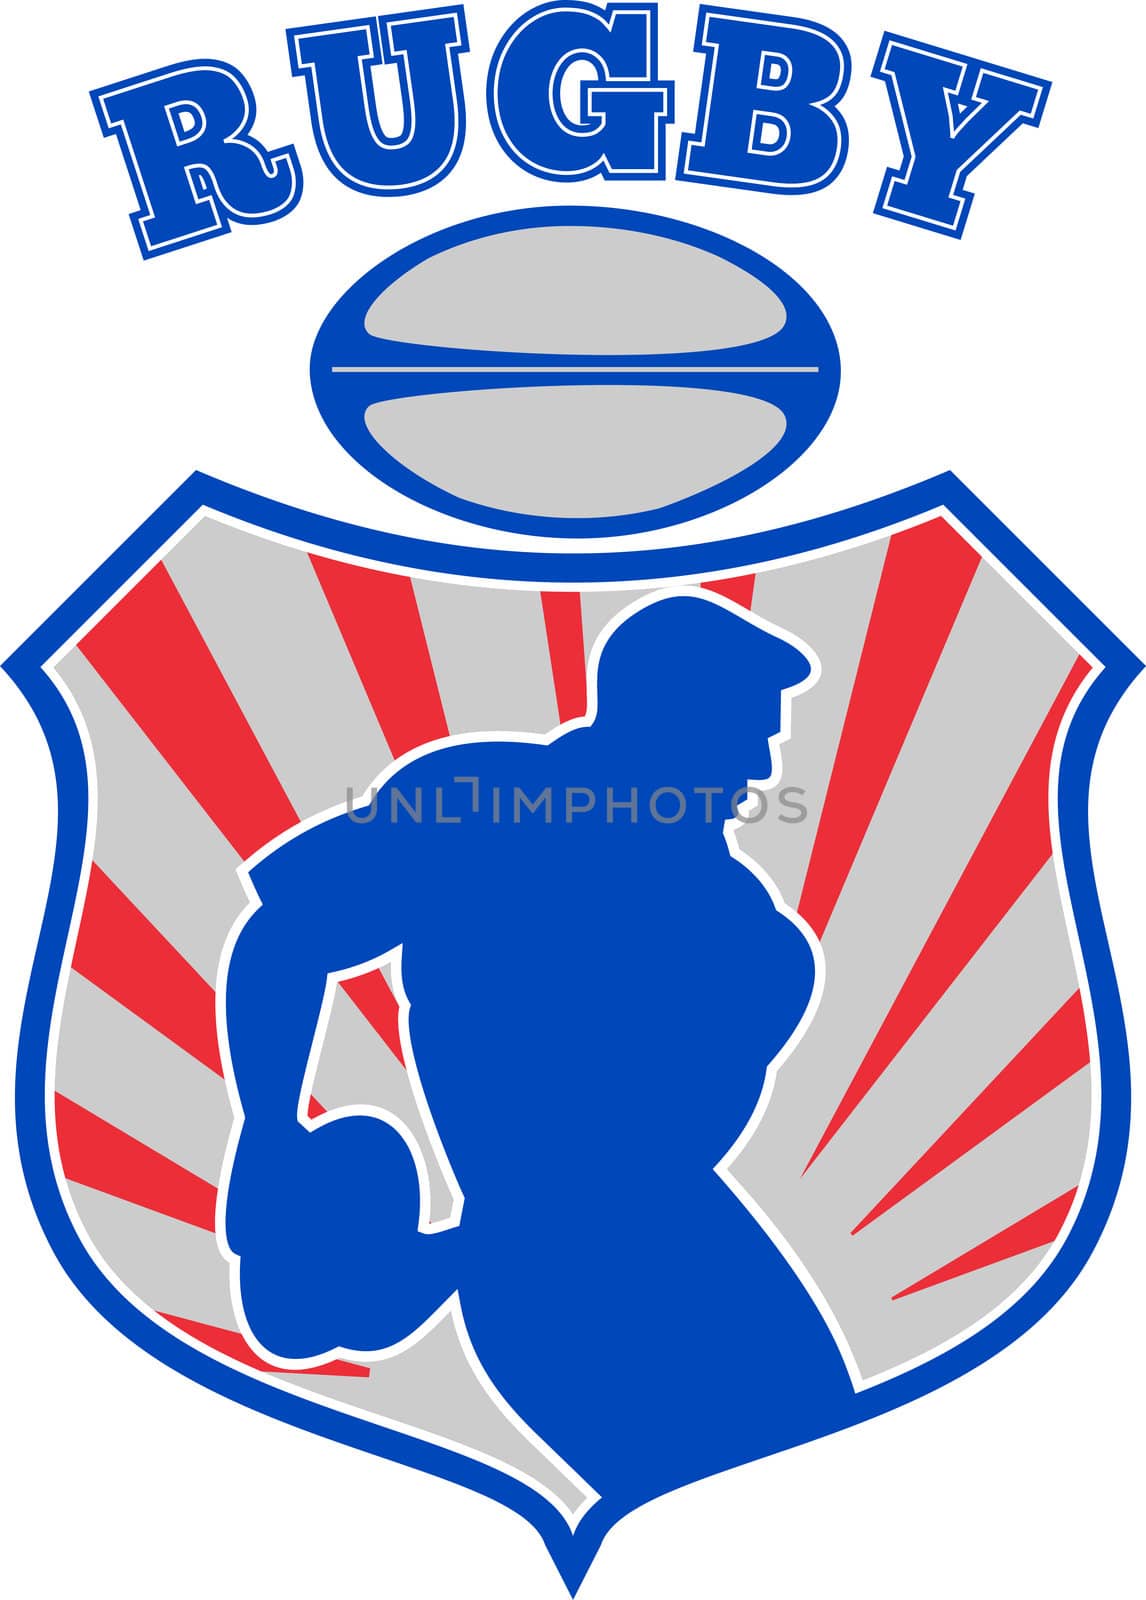 rugby player running bal shield by patrimonio